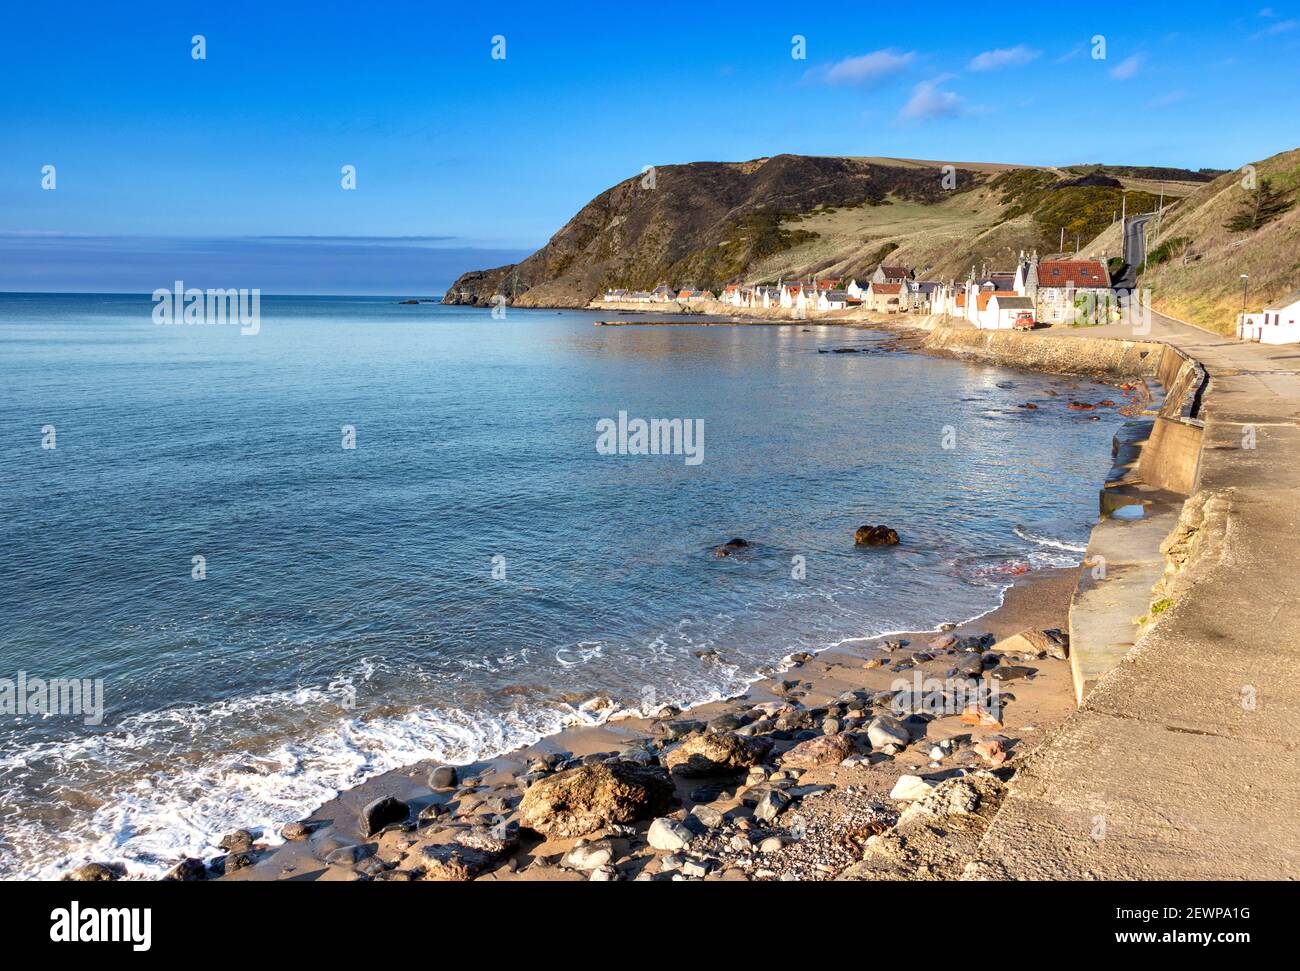 CROVIE VILLAGE ABERDEENSHIRE SCOTLAND A ROW OF HOUSES  THE WALKWAY A BLUE SKY AND A WAVE BREAKING OVER THE SAND AND PEBBLE BEACH Stock Photo